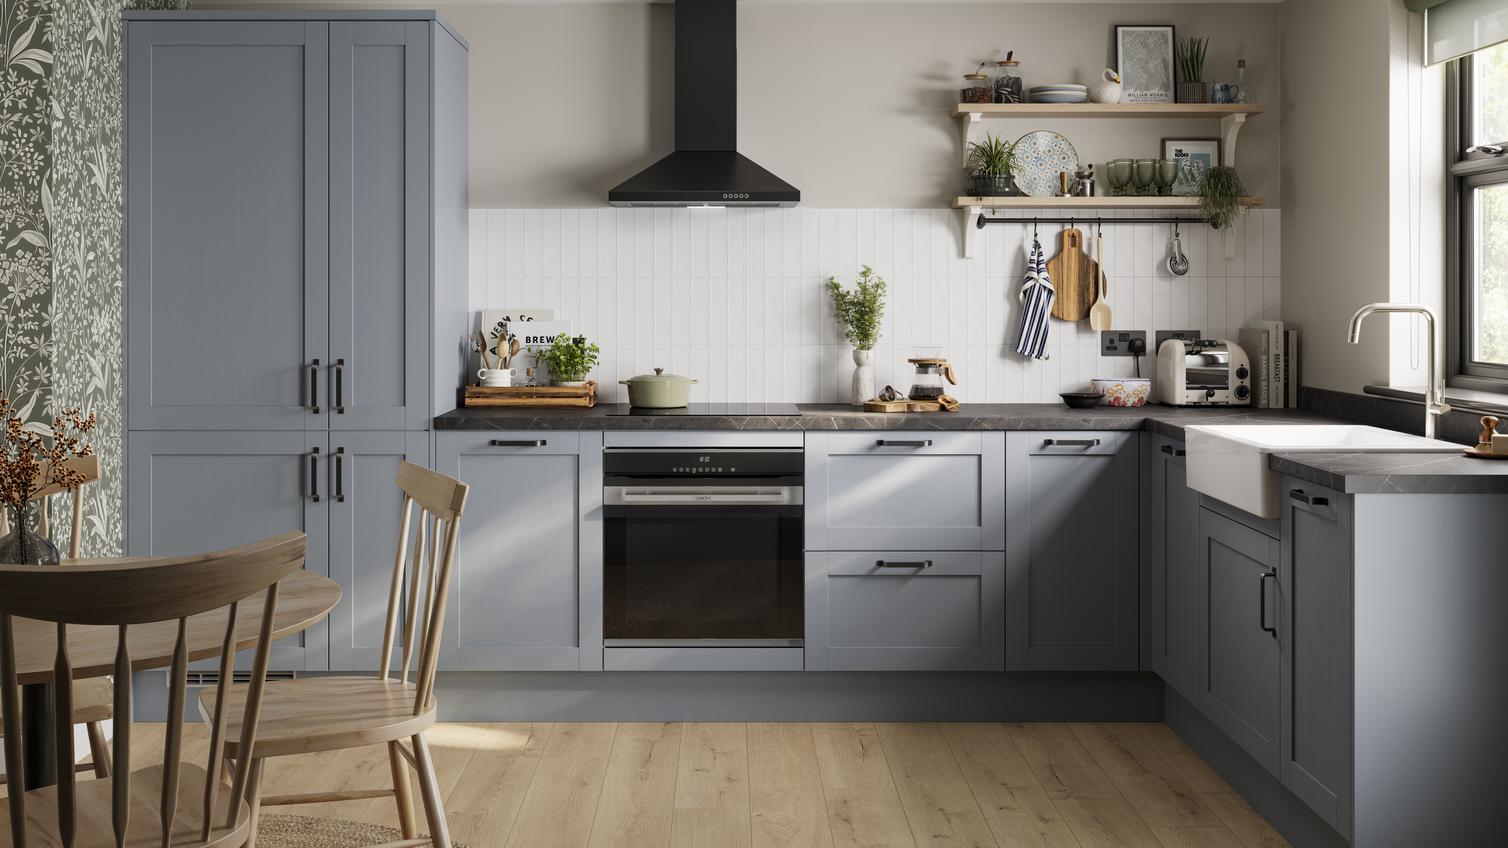 An l-shaped kitchen in a shaker style and dusk blue colour. Features oak-effect flooring and dark stone-style worktops.